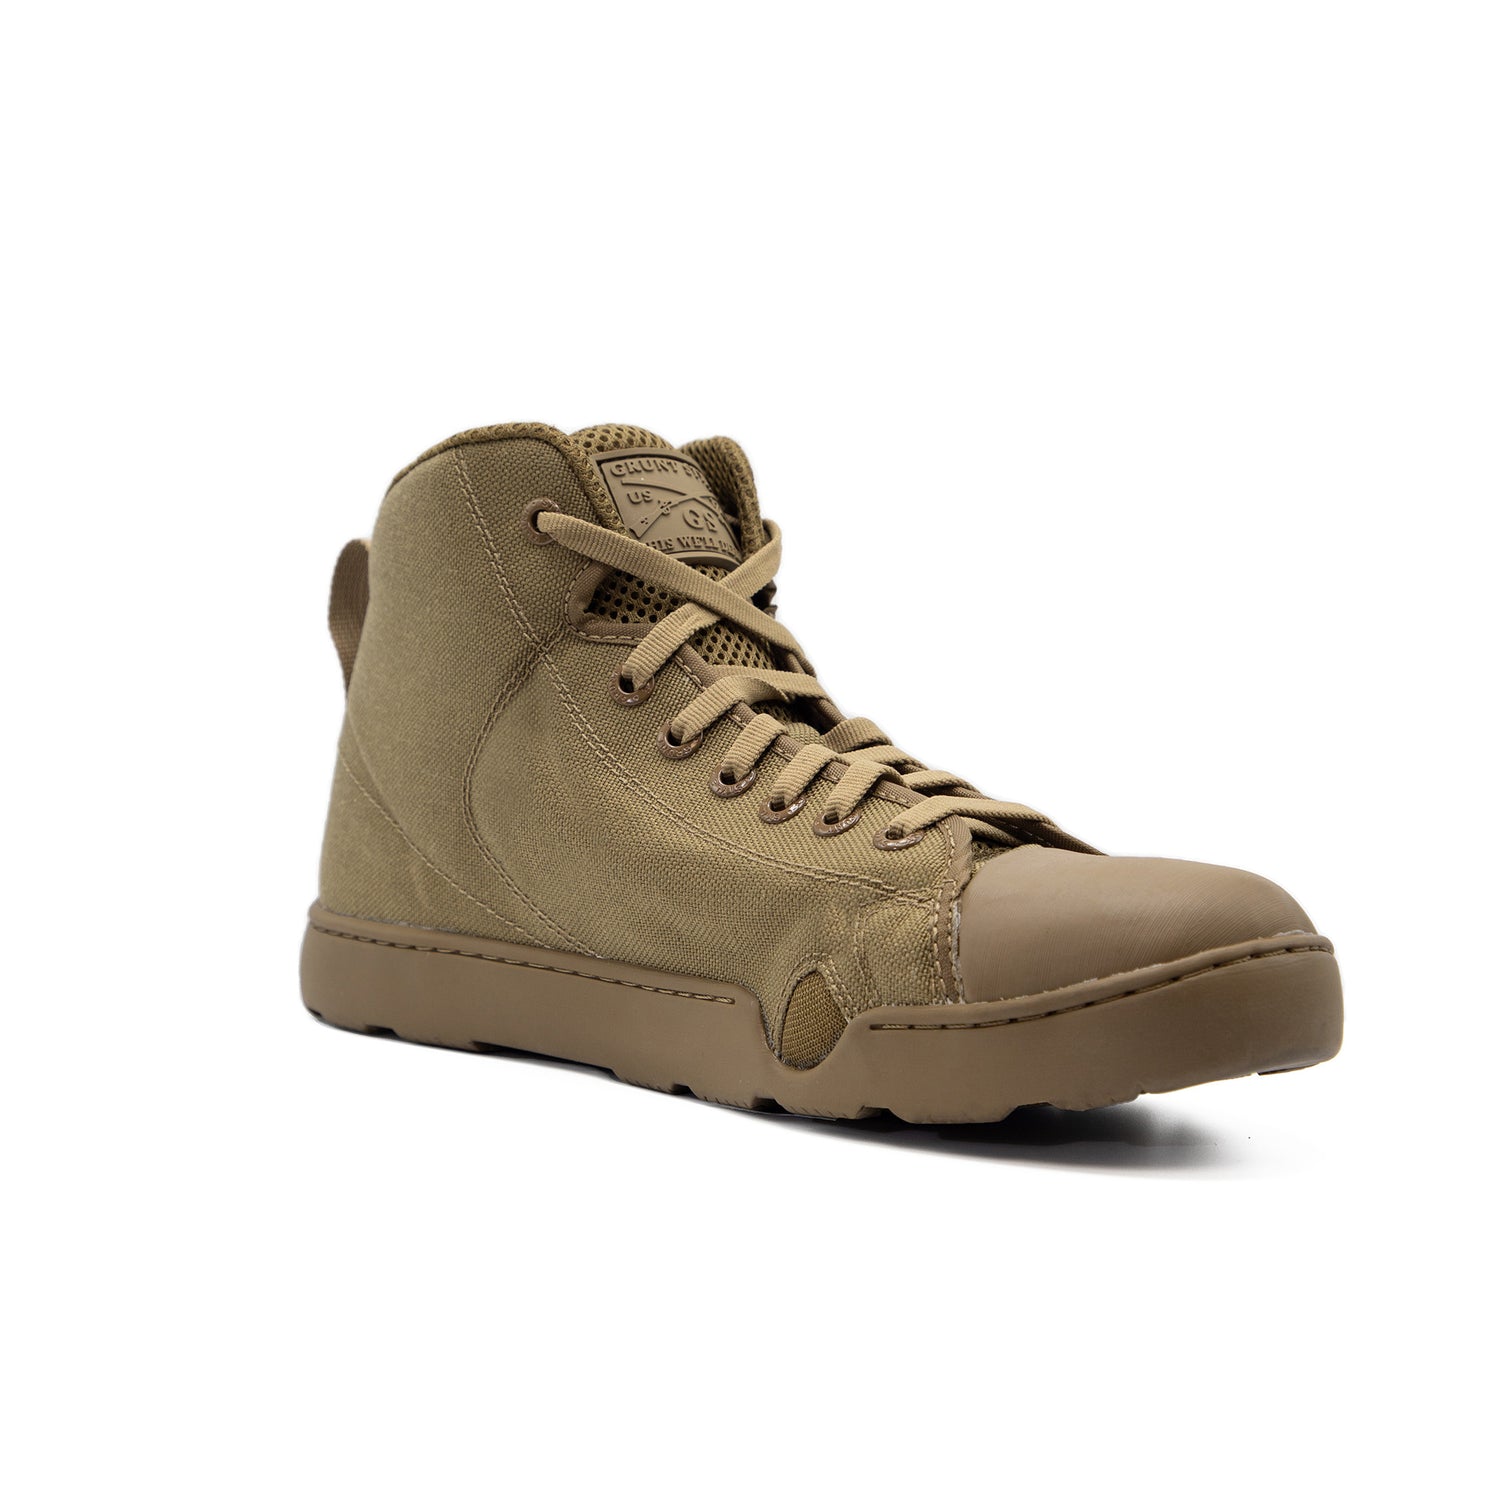 Maritime Limited Edition Mid Boot Coyote | Grunt Style